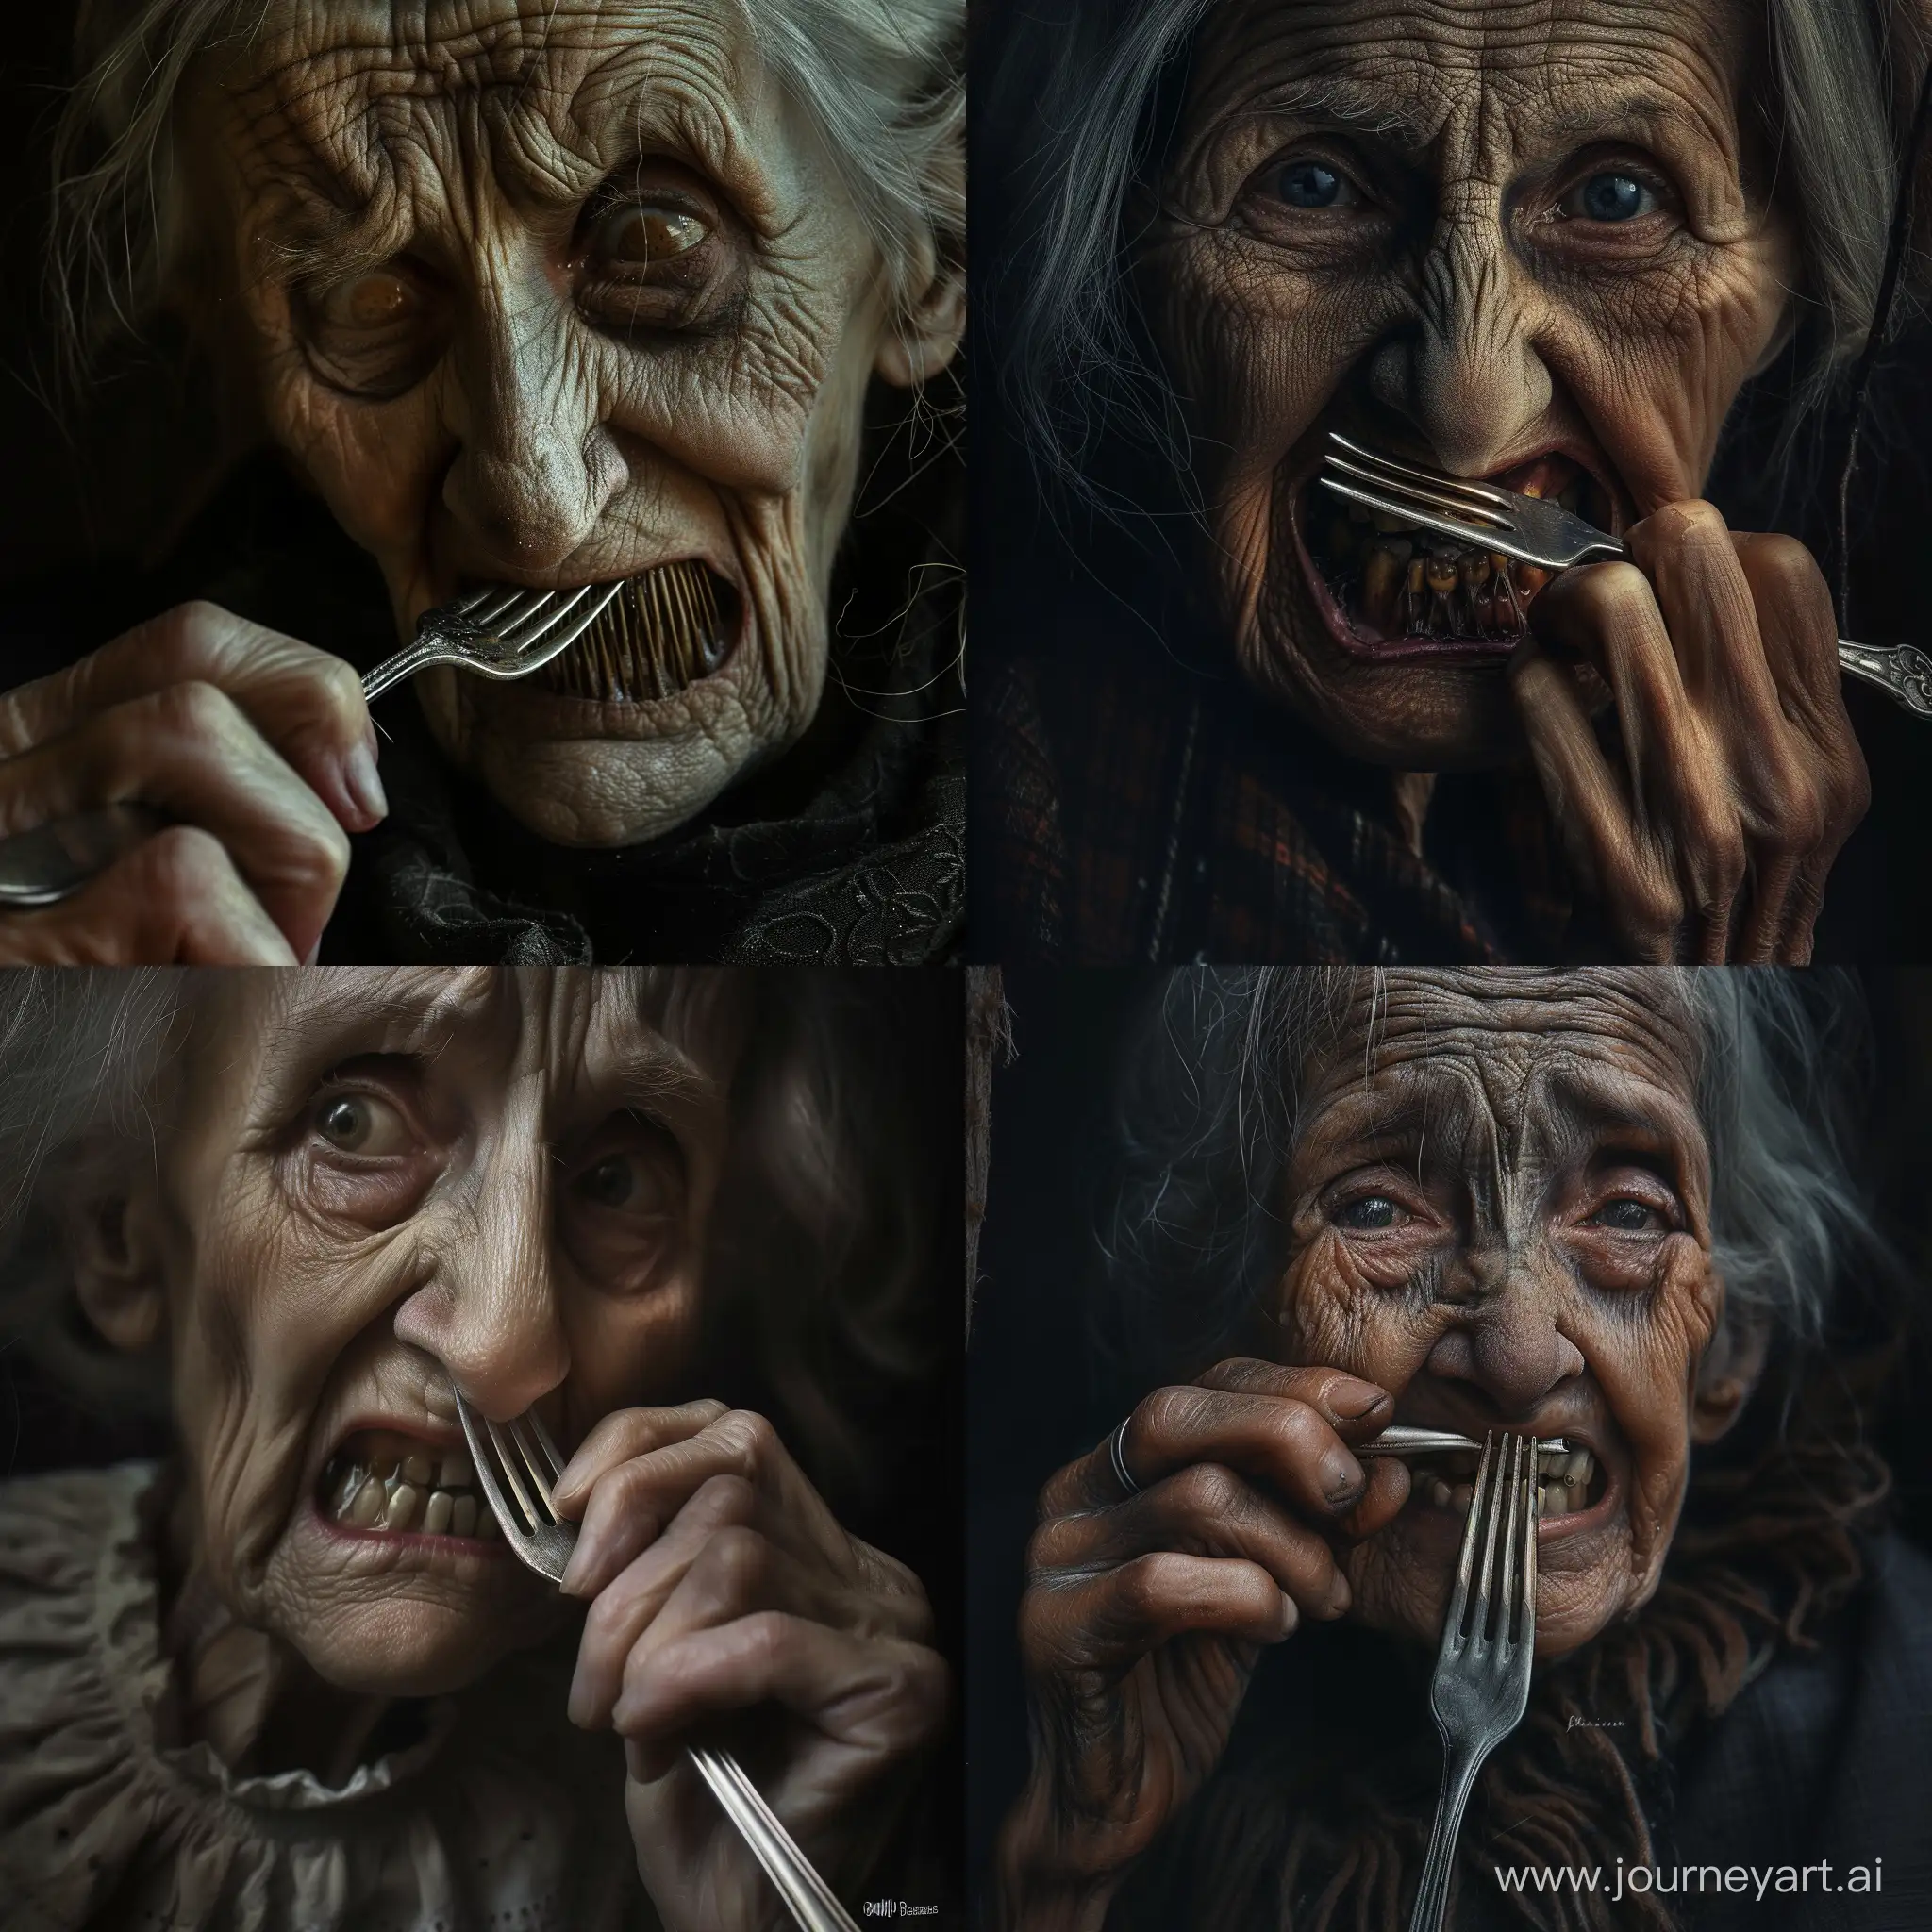 Eccentric-Elderly-Woman-Using-Fork-for-Unconventional-Dental-Care